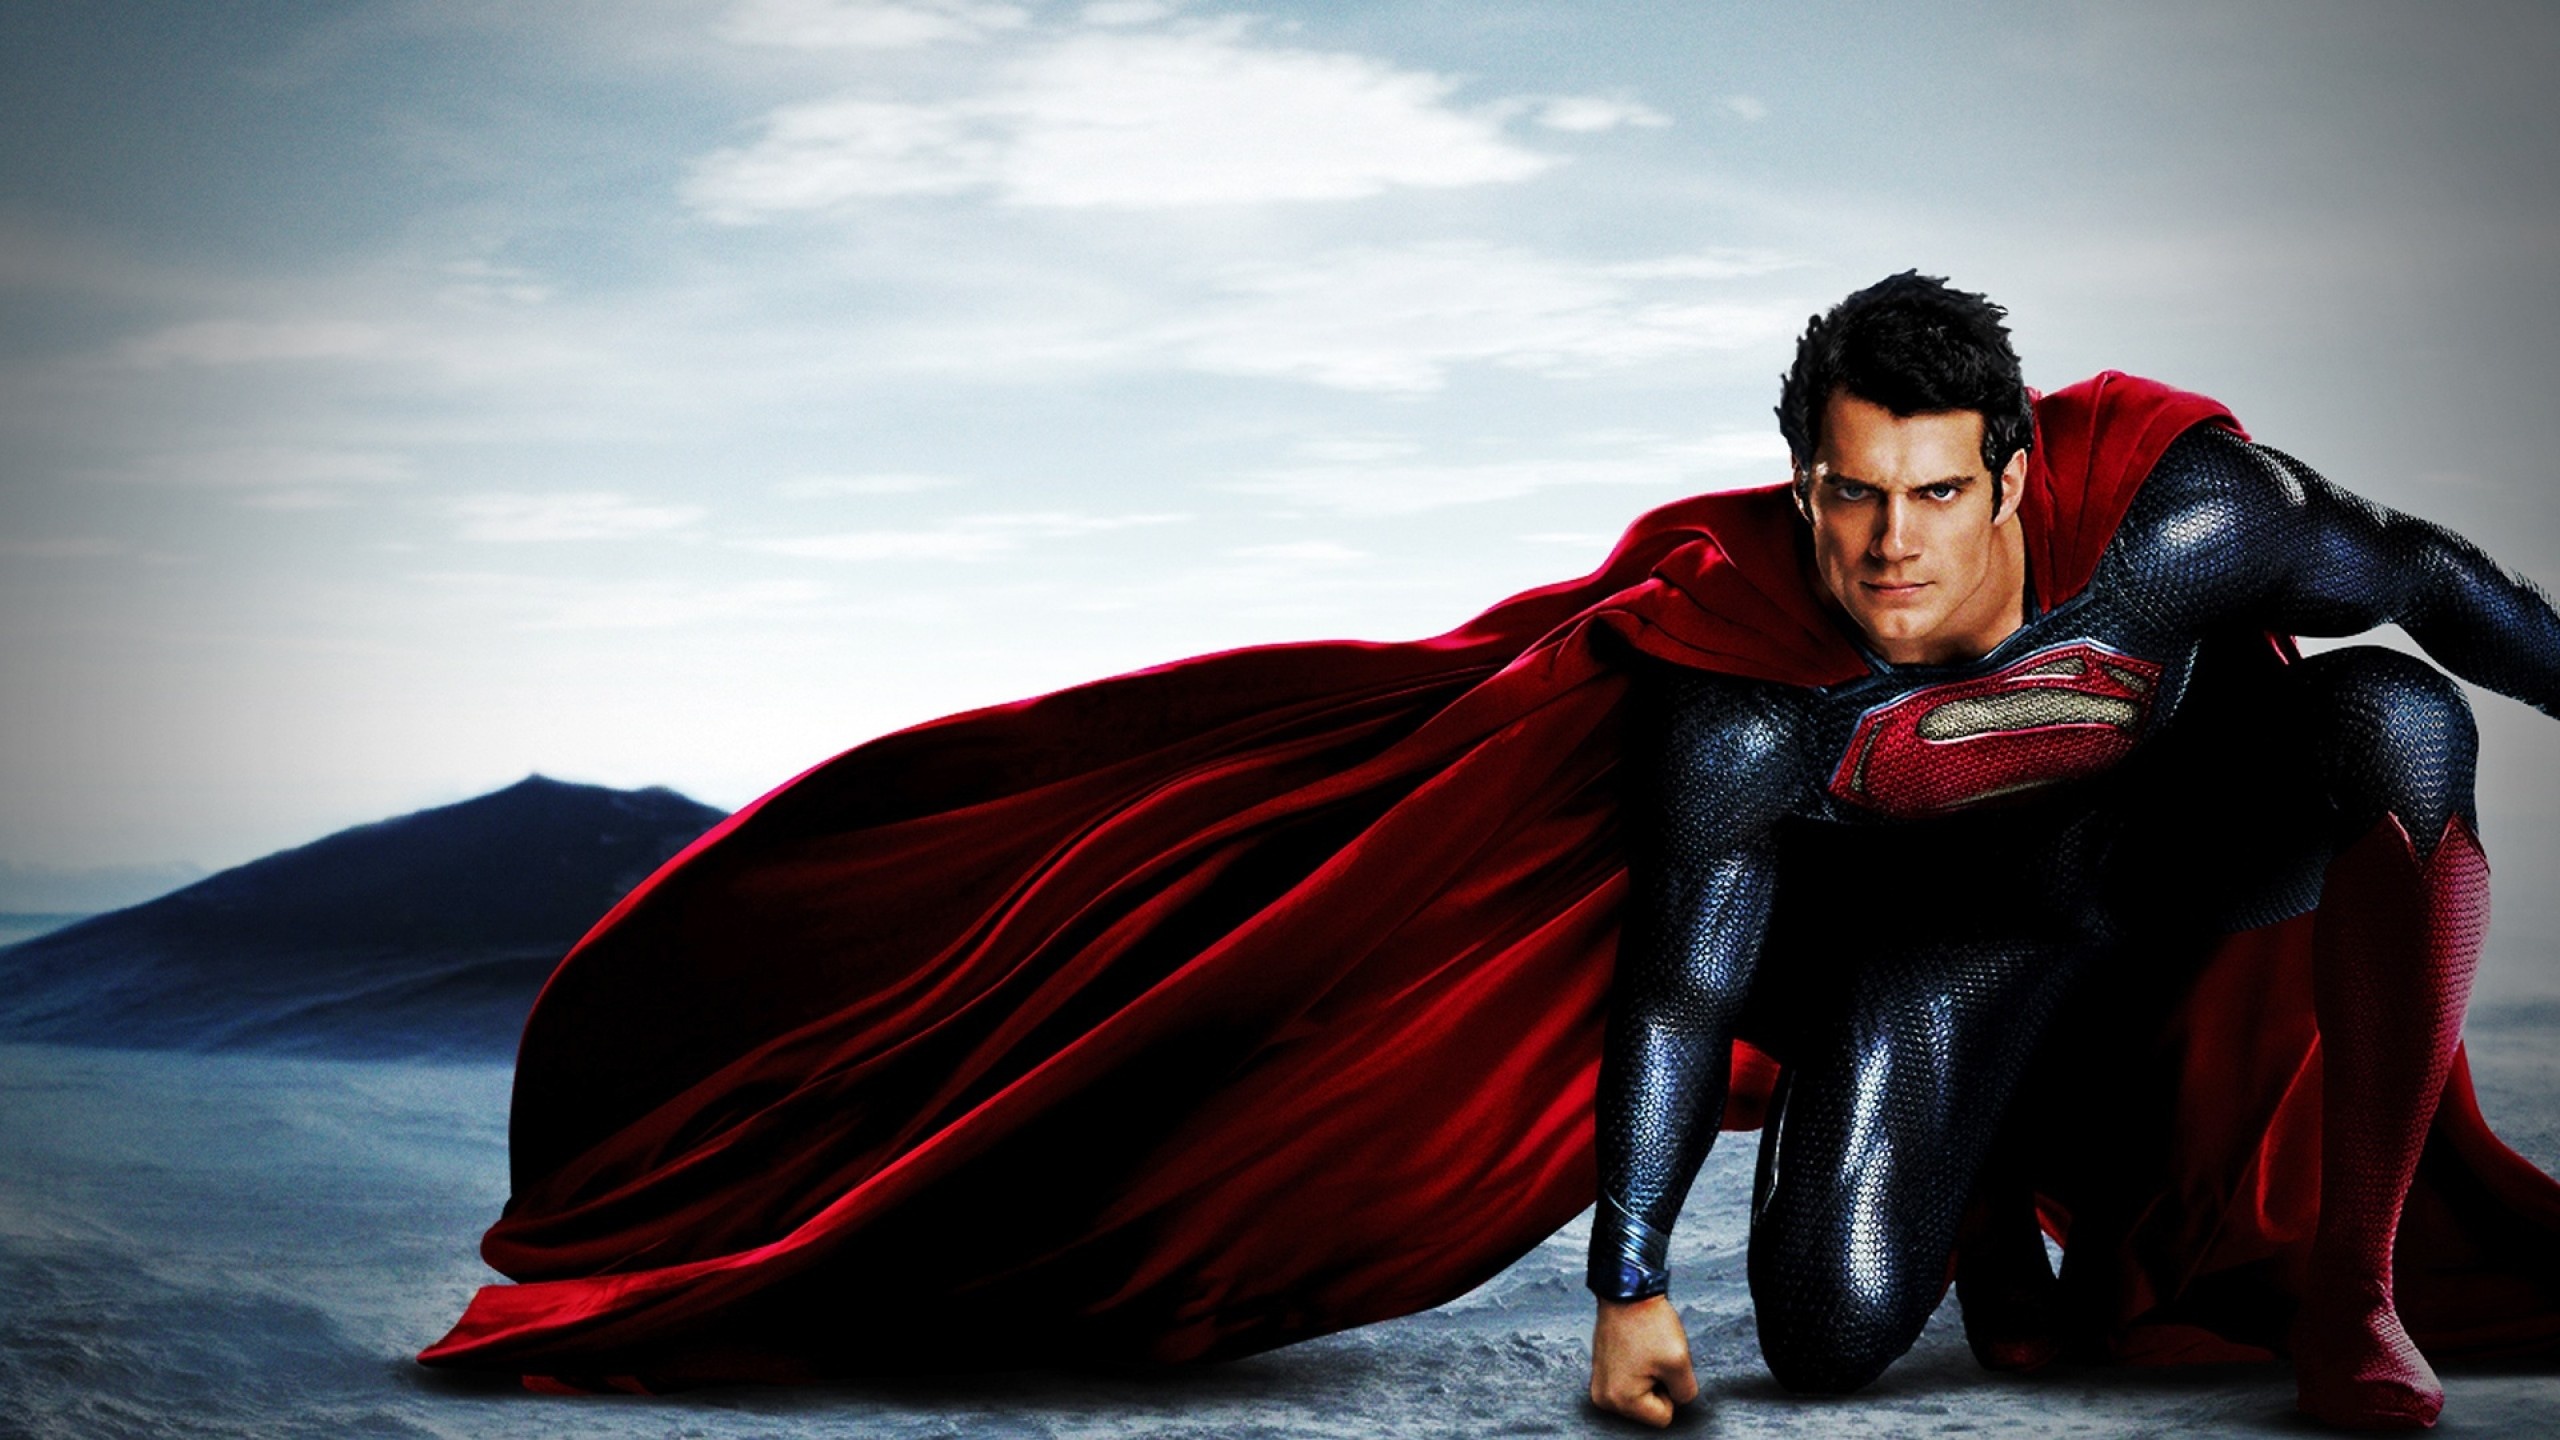 Henry Cavill HD wallpapers, Background images, 2560x1440 HD Desktop